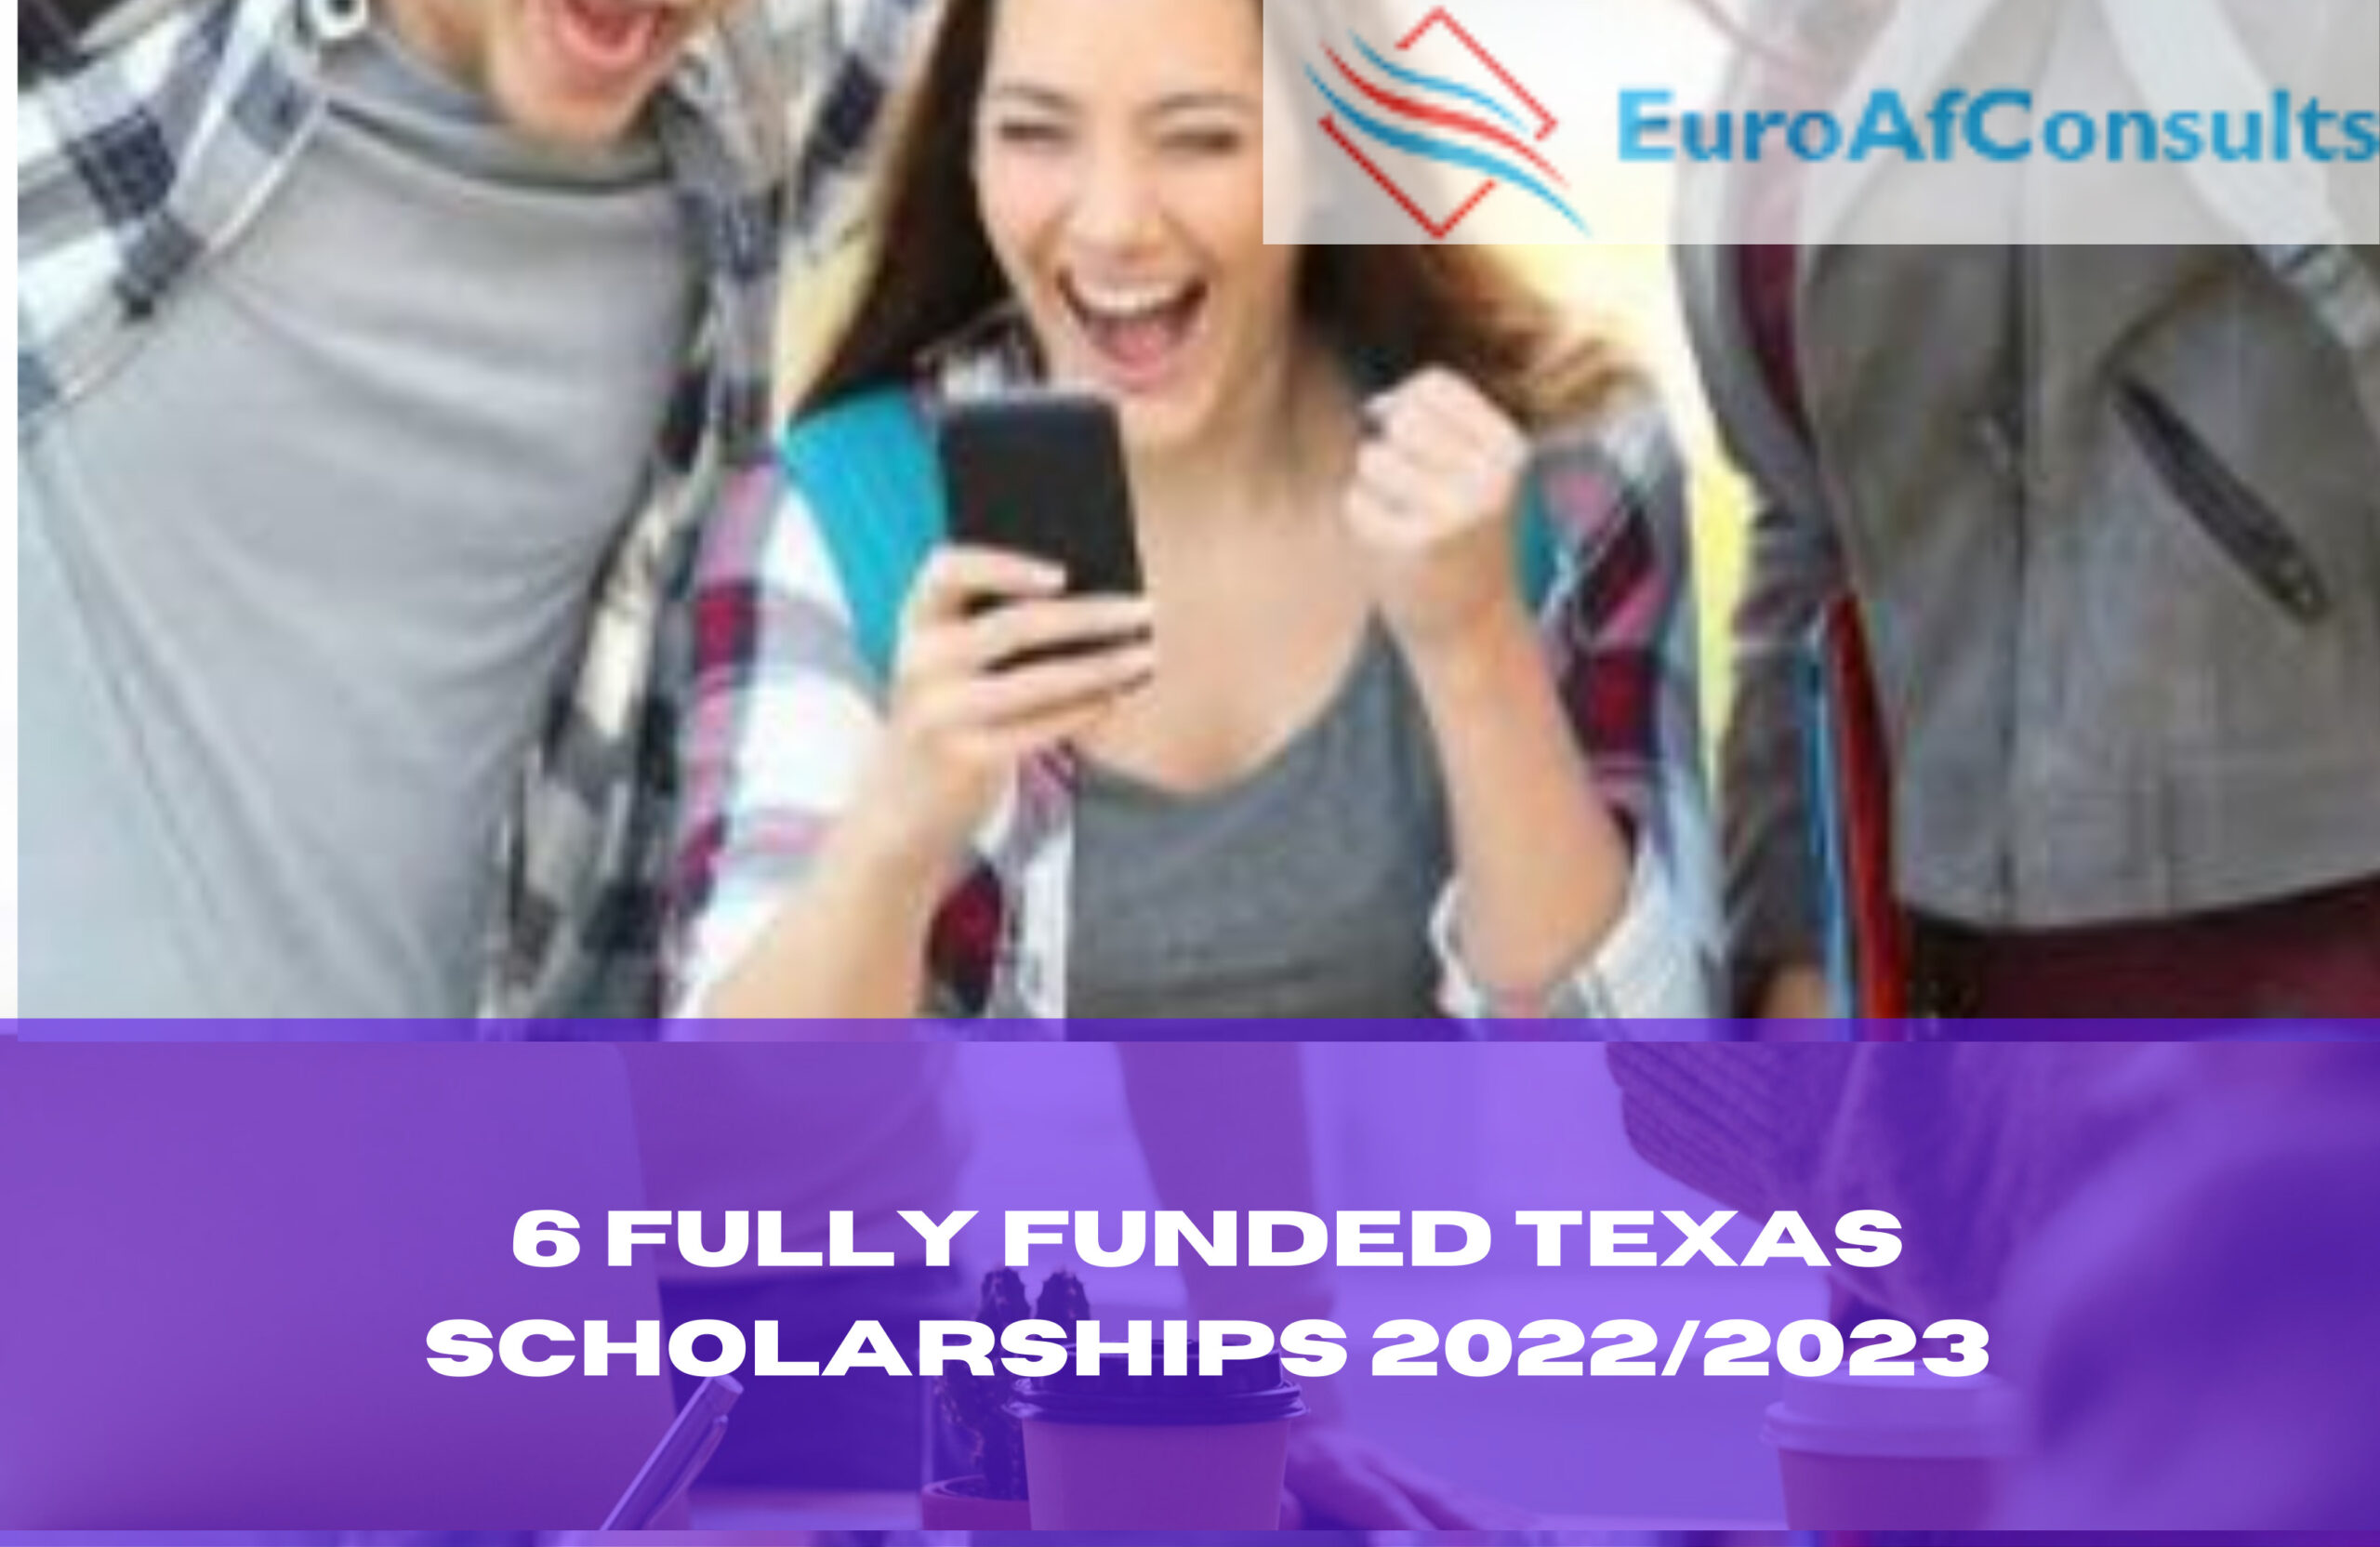 You are currently viewing 6 Fully Funded Texas Scholarships 2022/2023